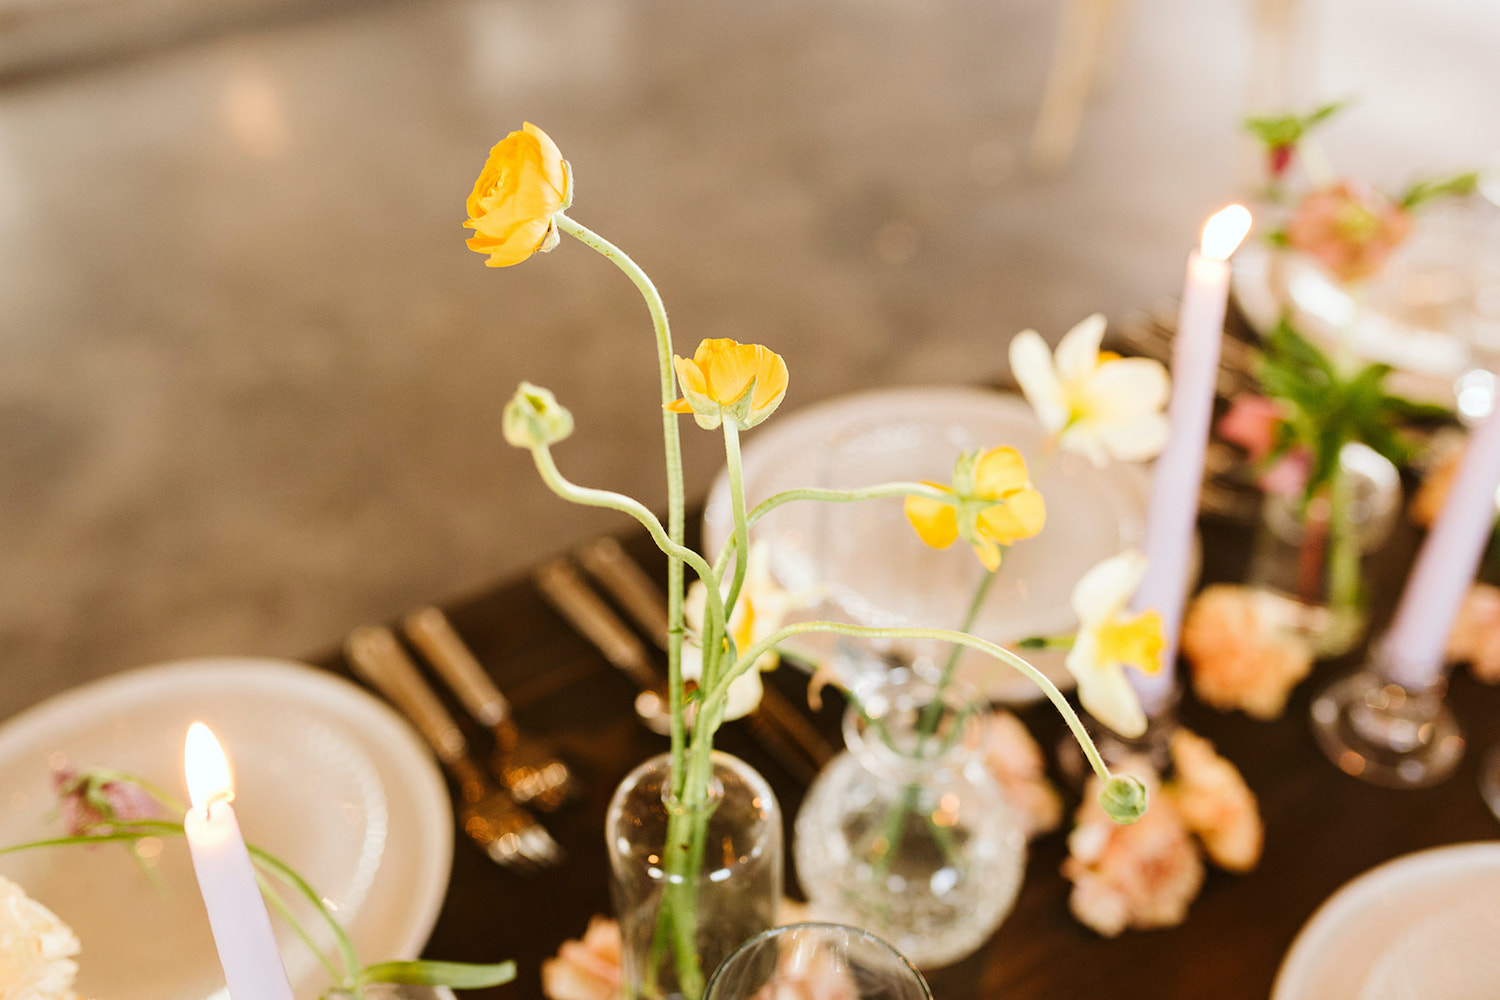 small yellow flowers with long stems in a simple glass vase